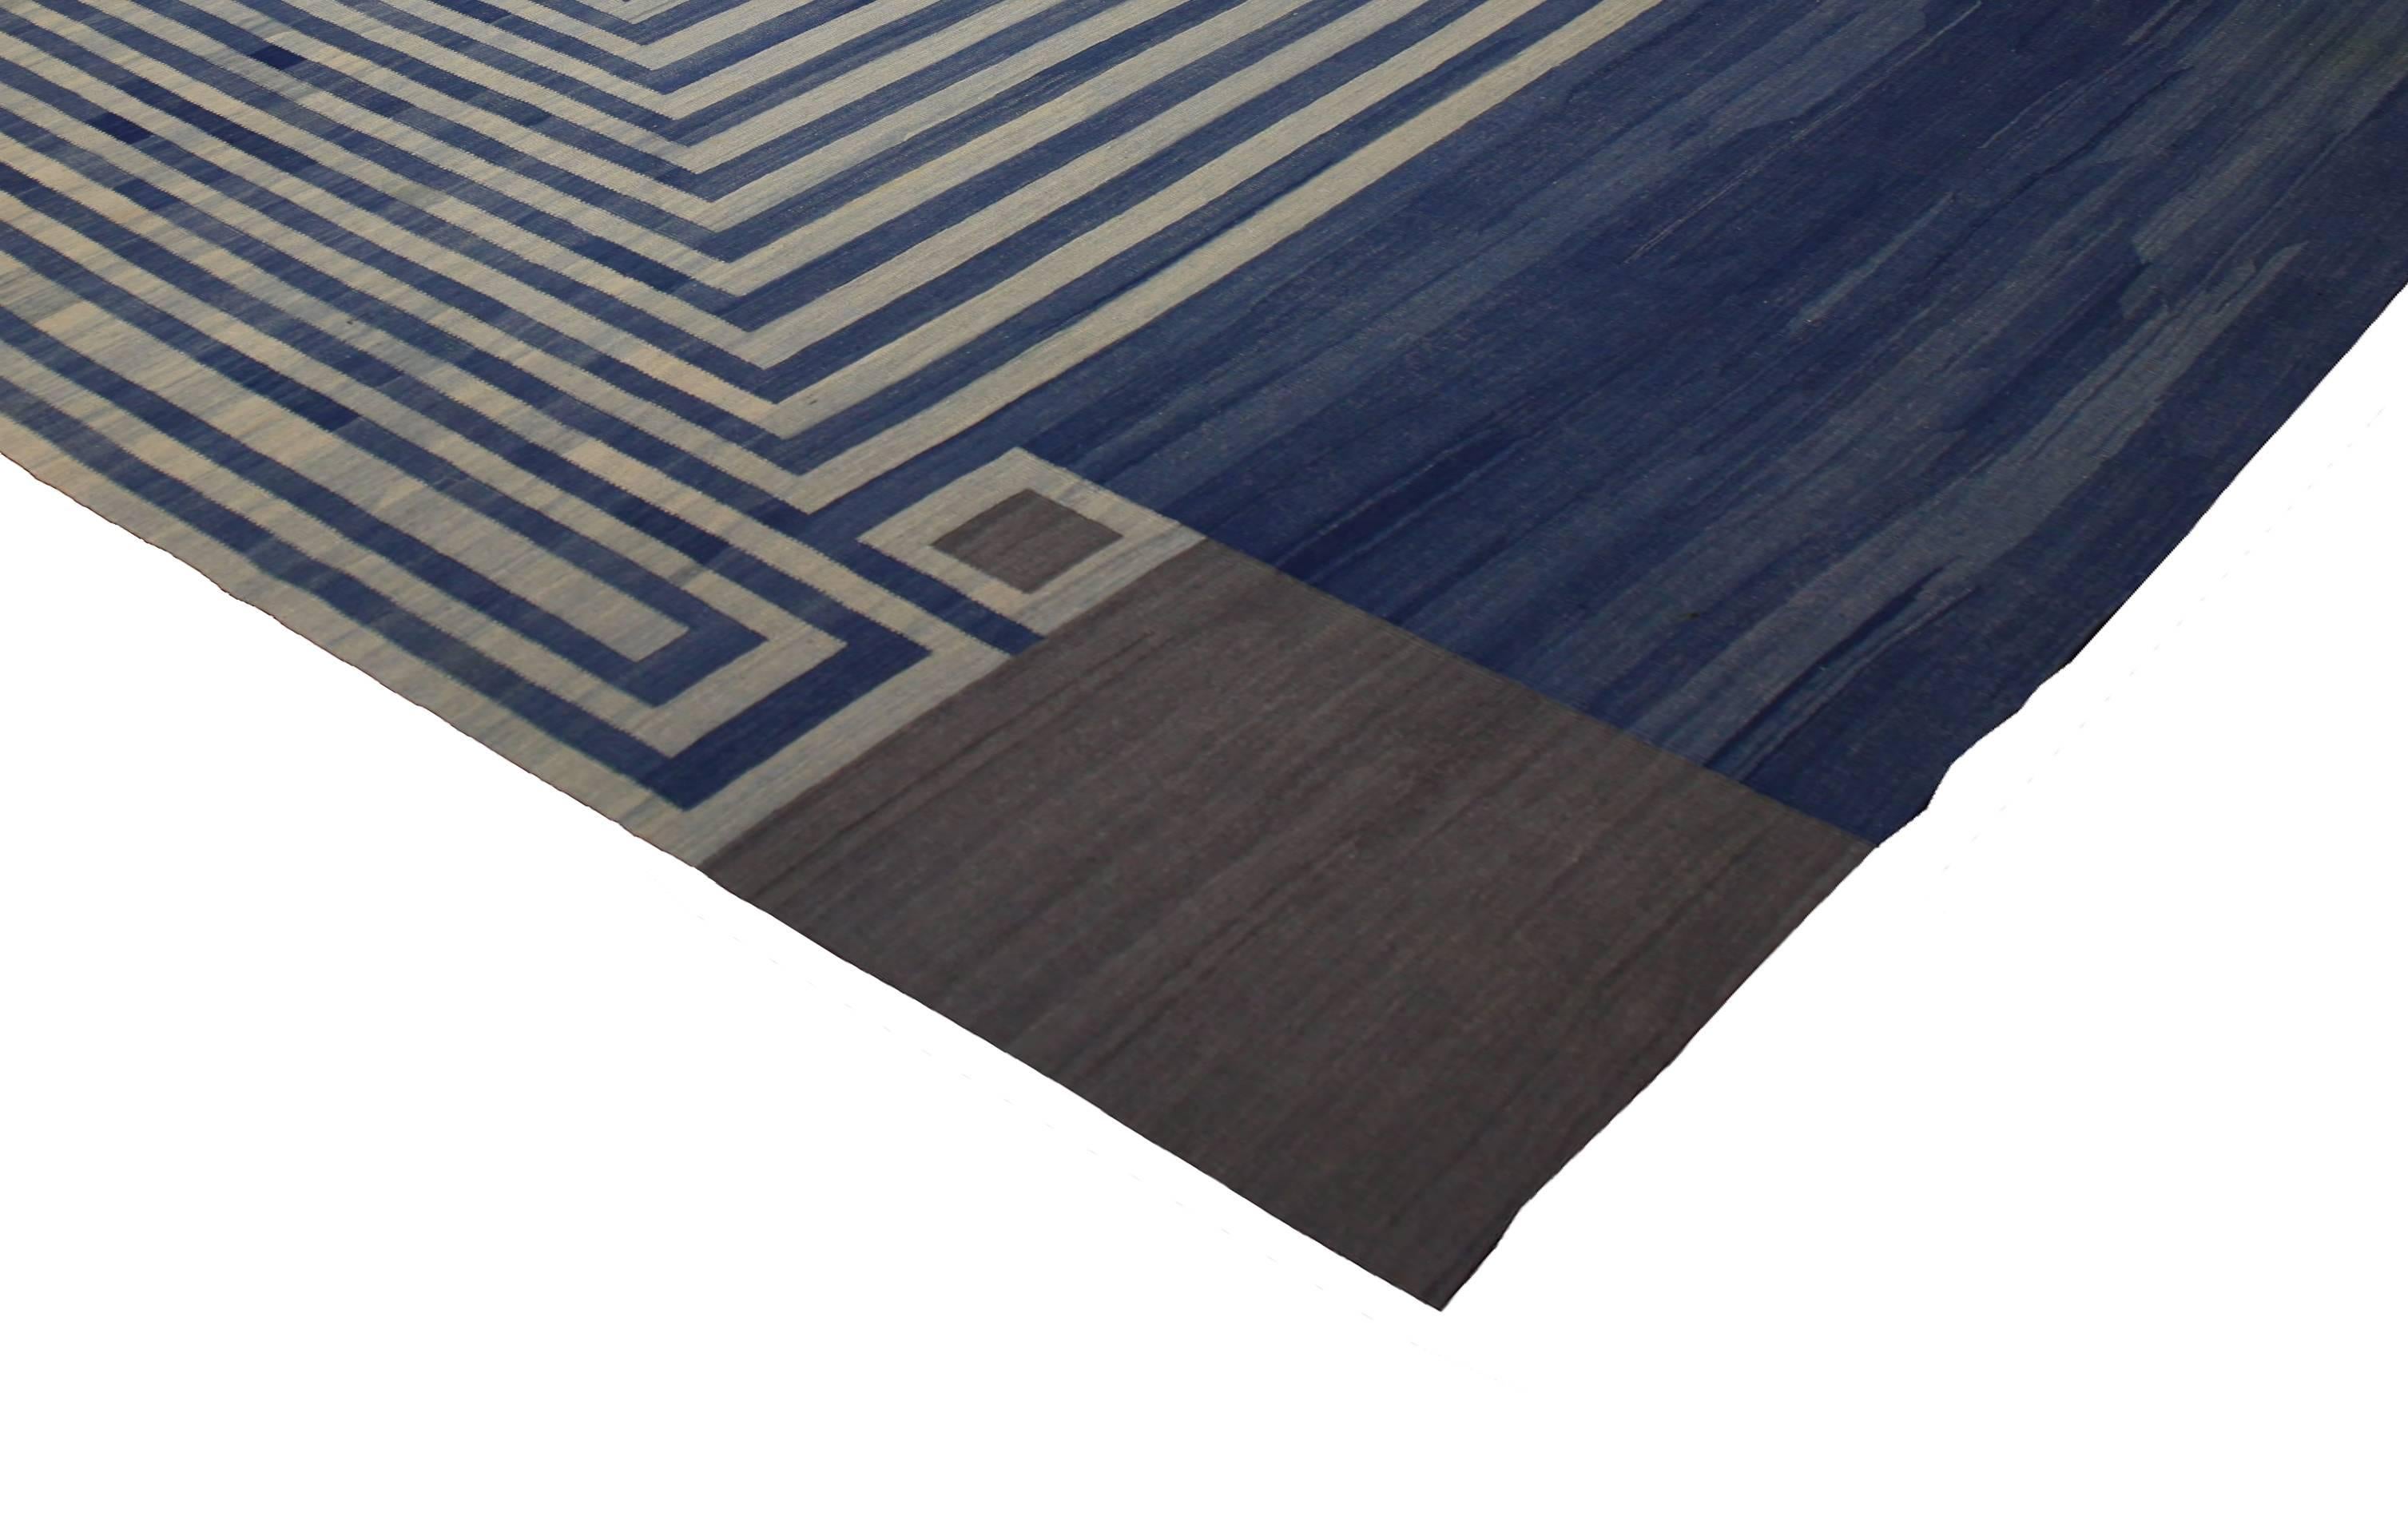 Causal and calm or bold and Bohemian, this vintage Afghani Kilim rug features a Mid-Century Modern style. This flat-weave Kilim rug showcases a creamy beige square with alternating blue stripes. Rendered in variegated shades of blue, grey and